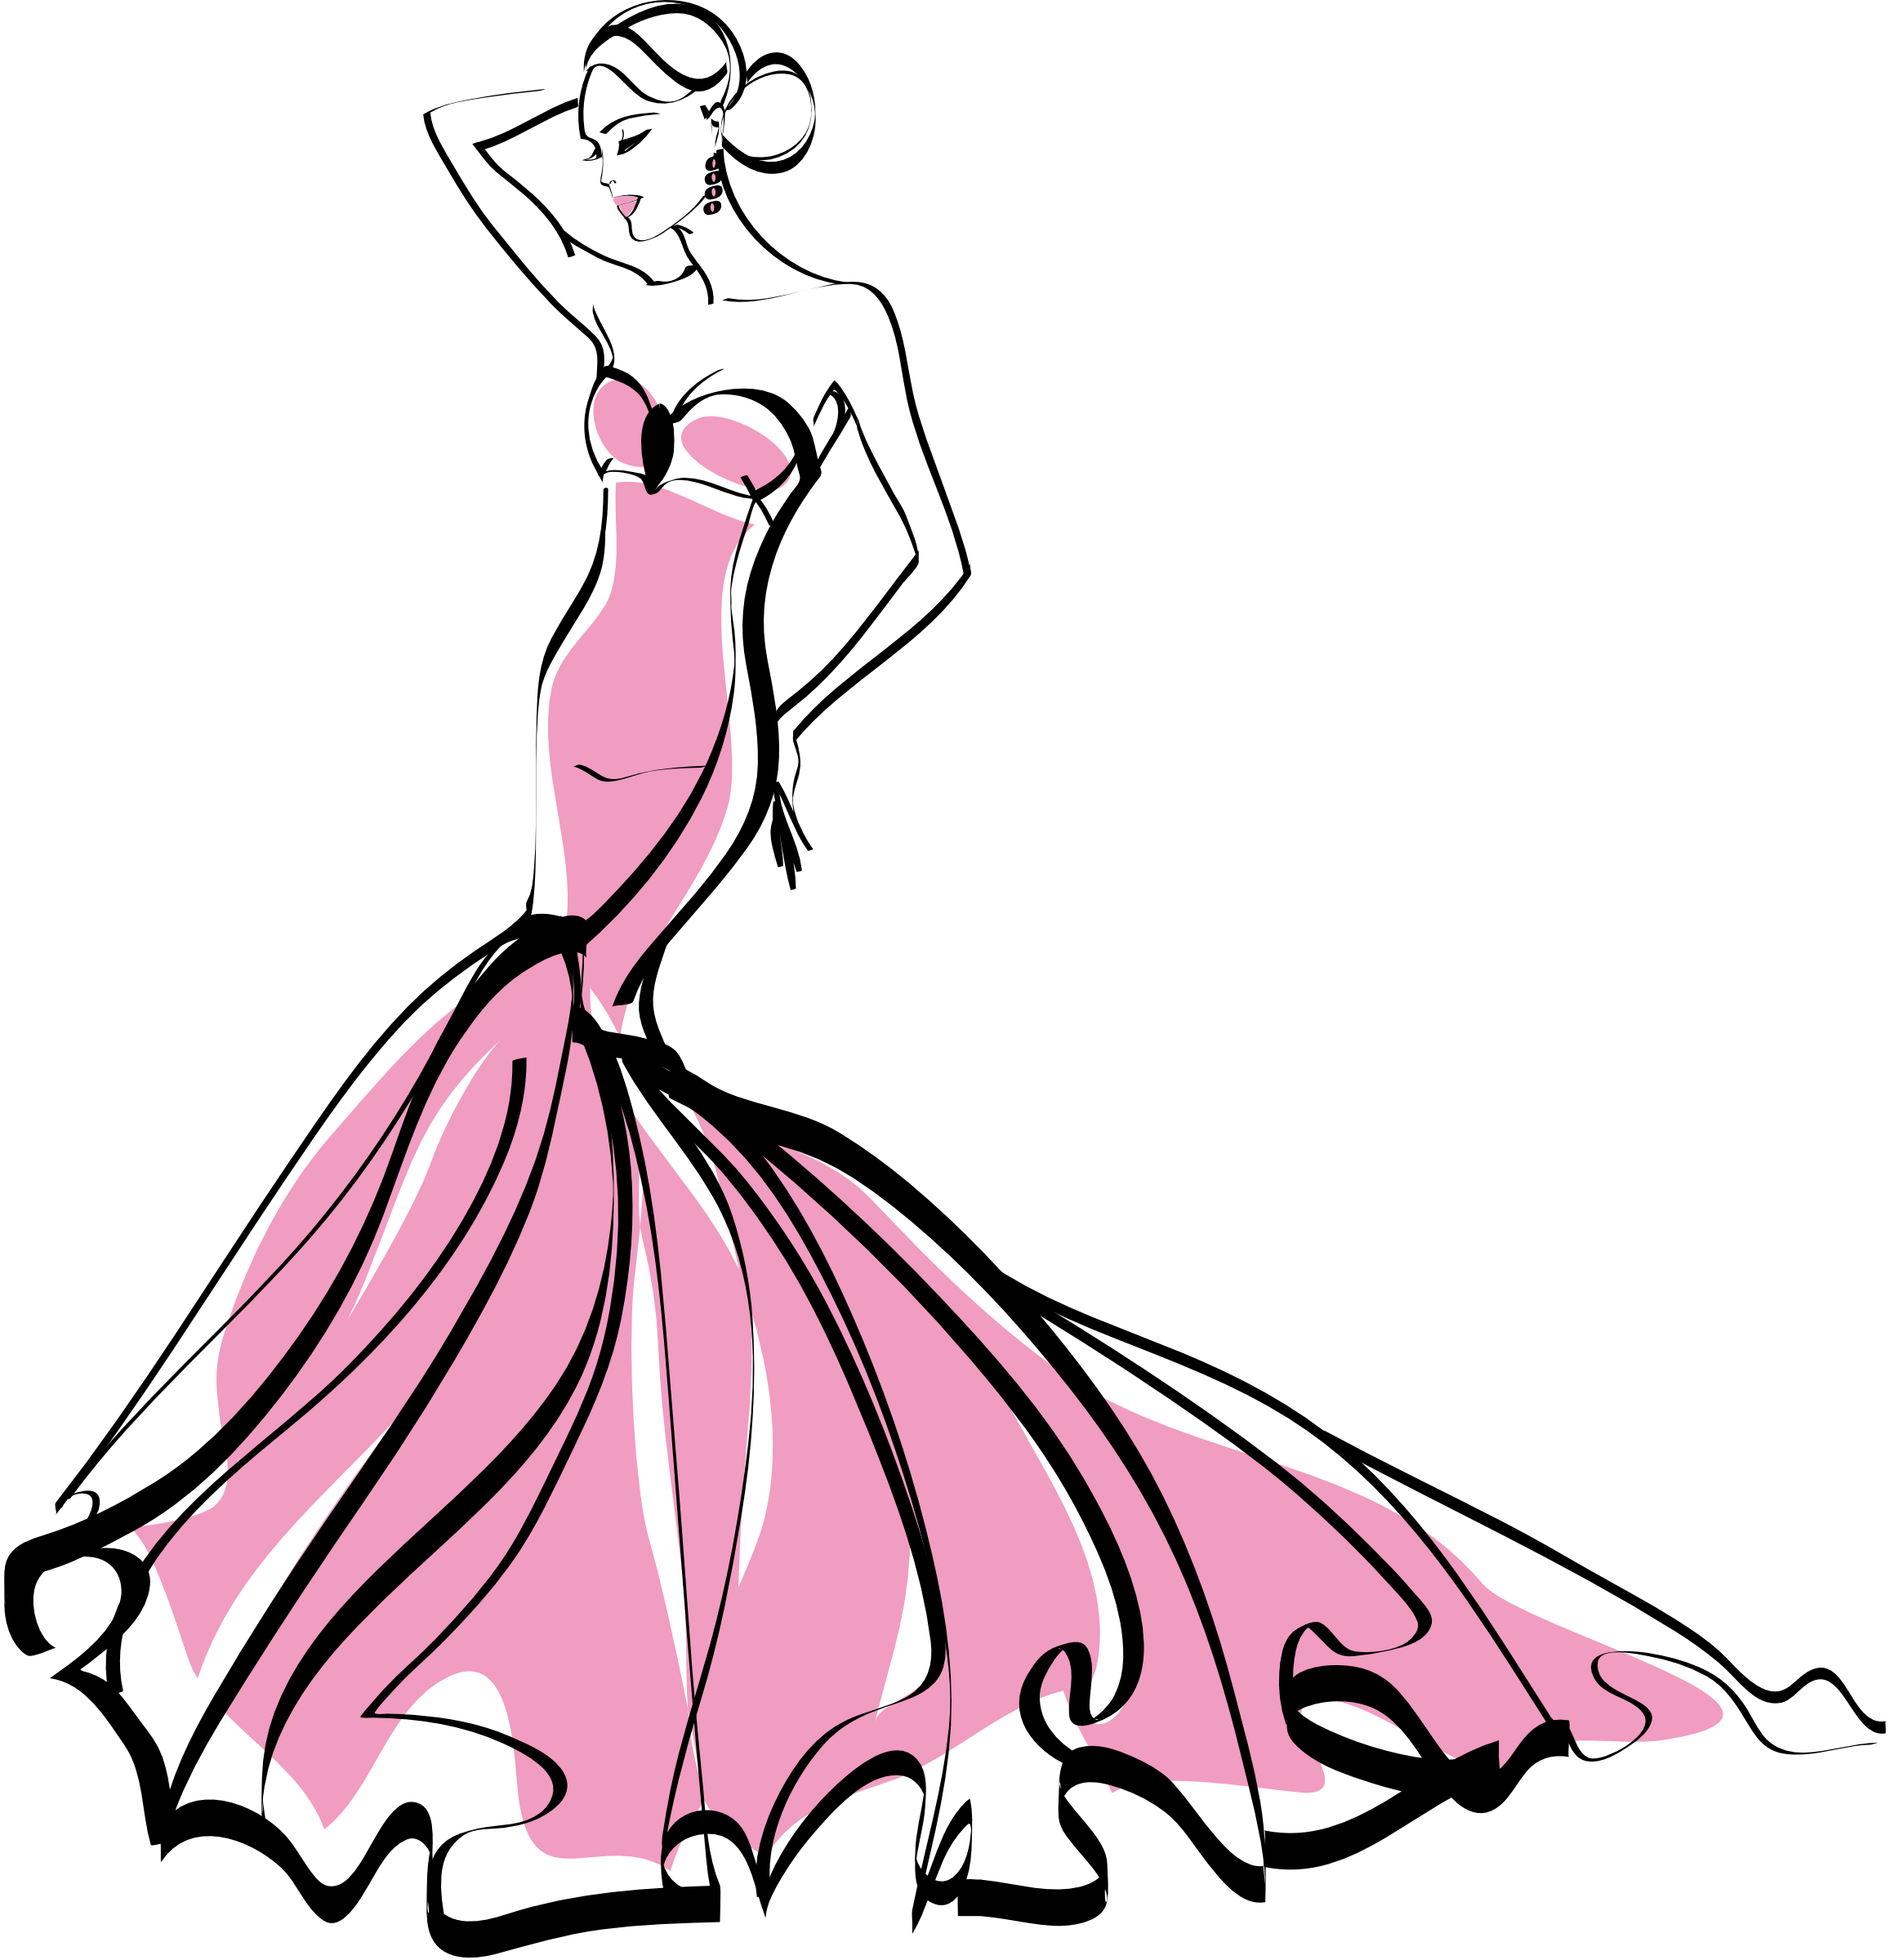 Download Fashion Free Png Transparent Image And Clipart